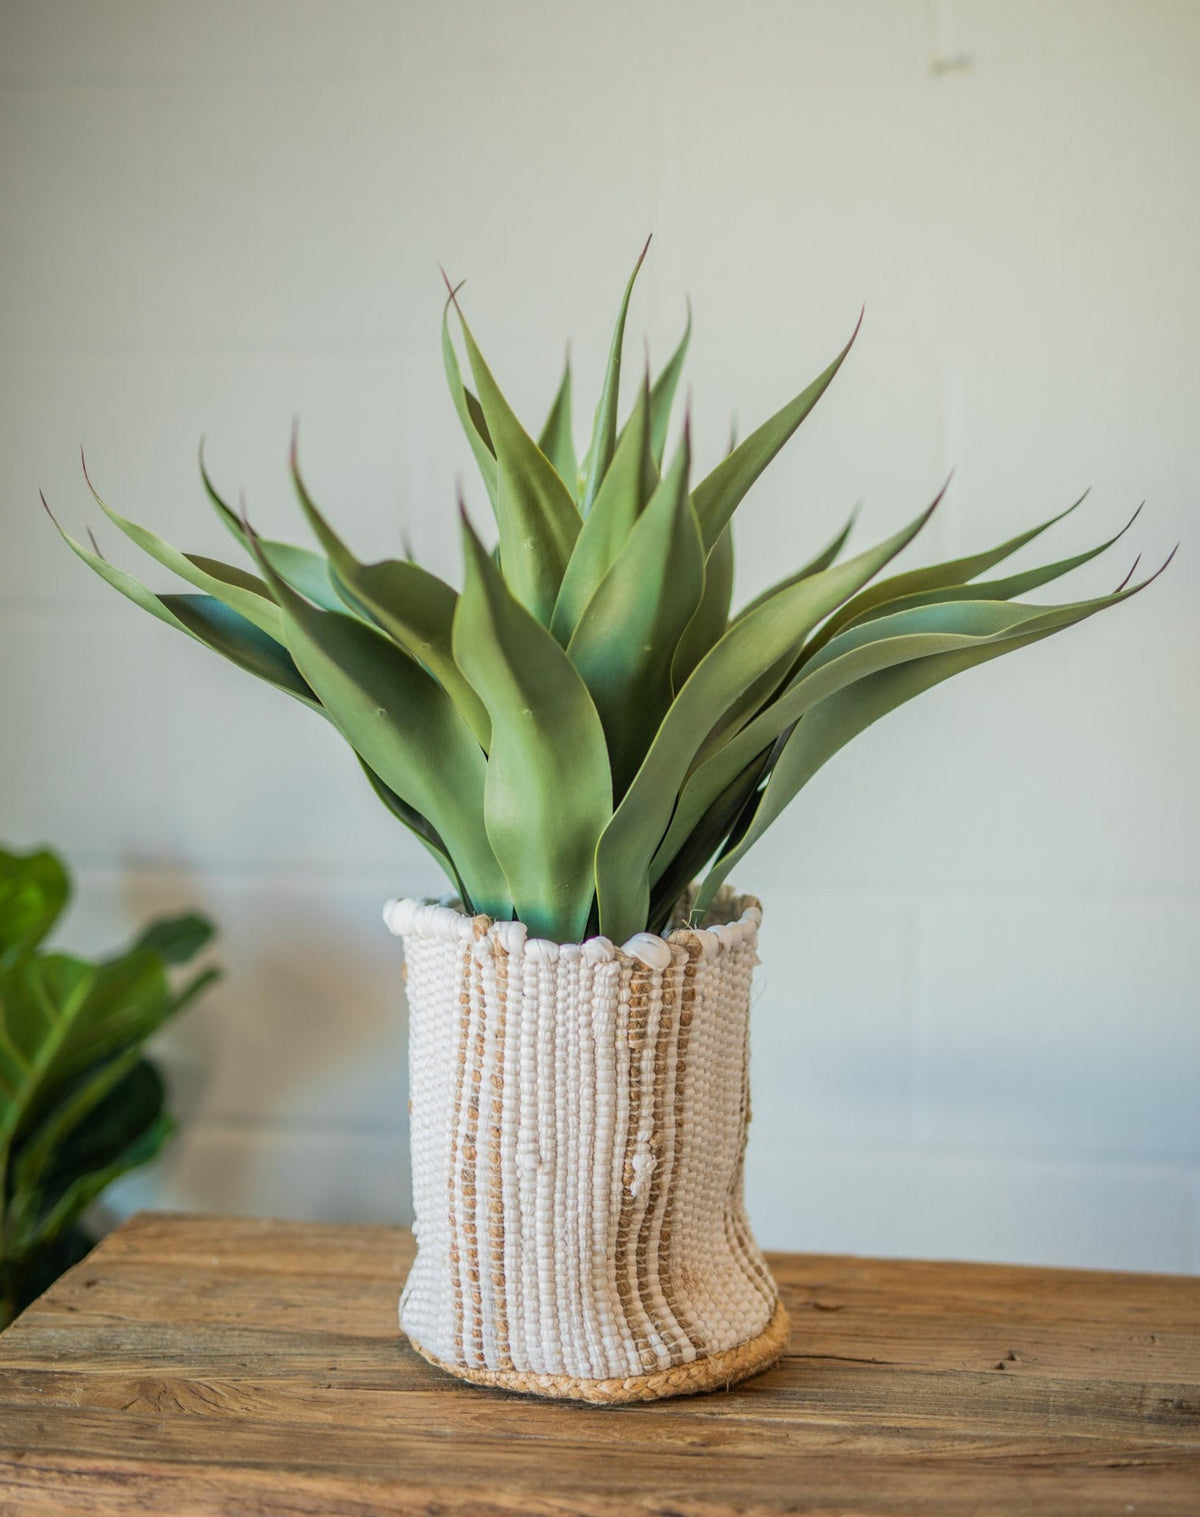 Faux Agave Plant in Pot